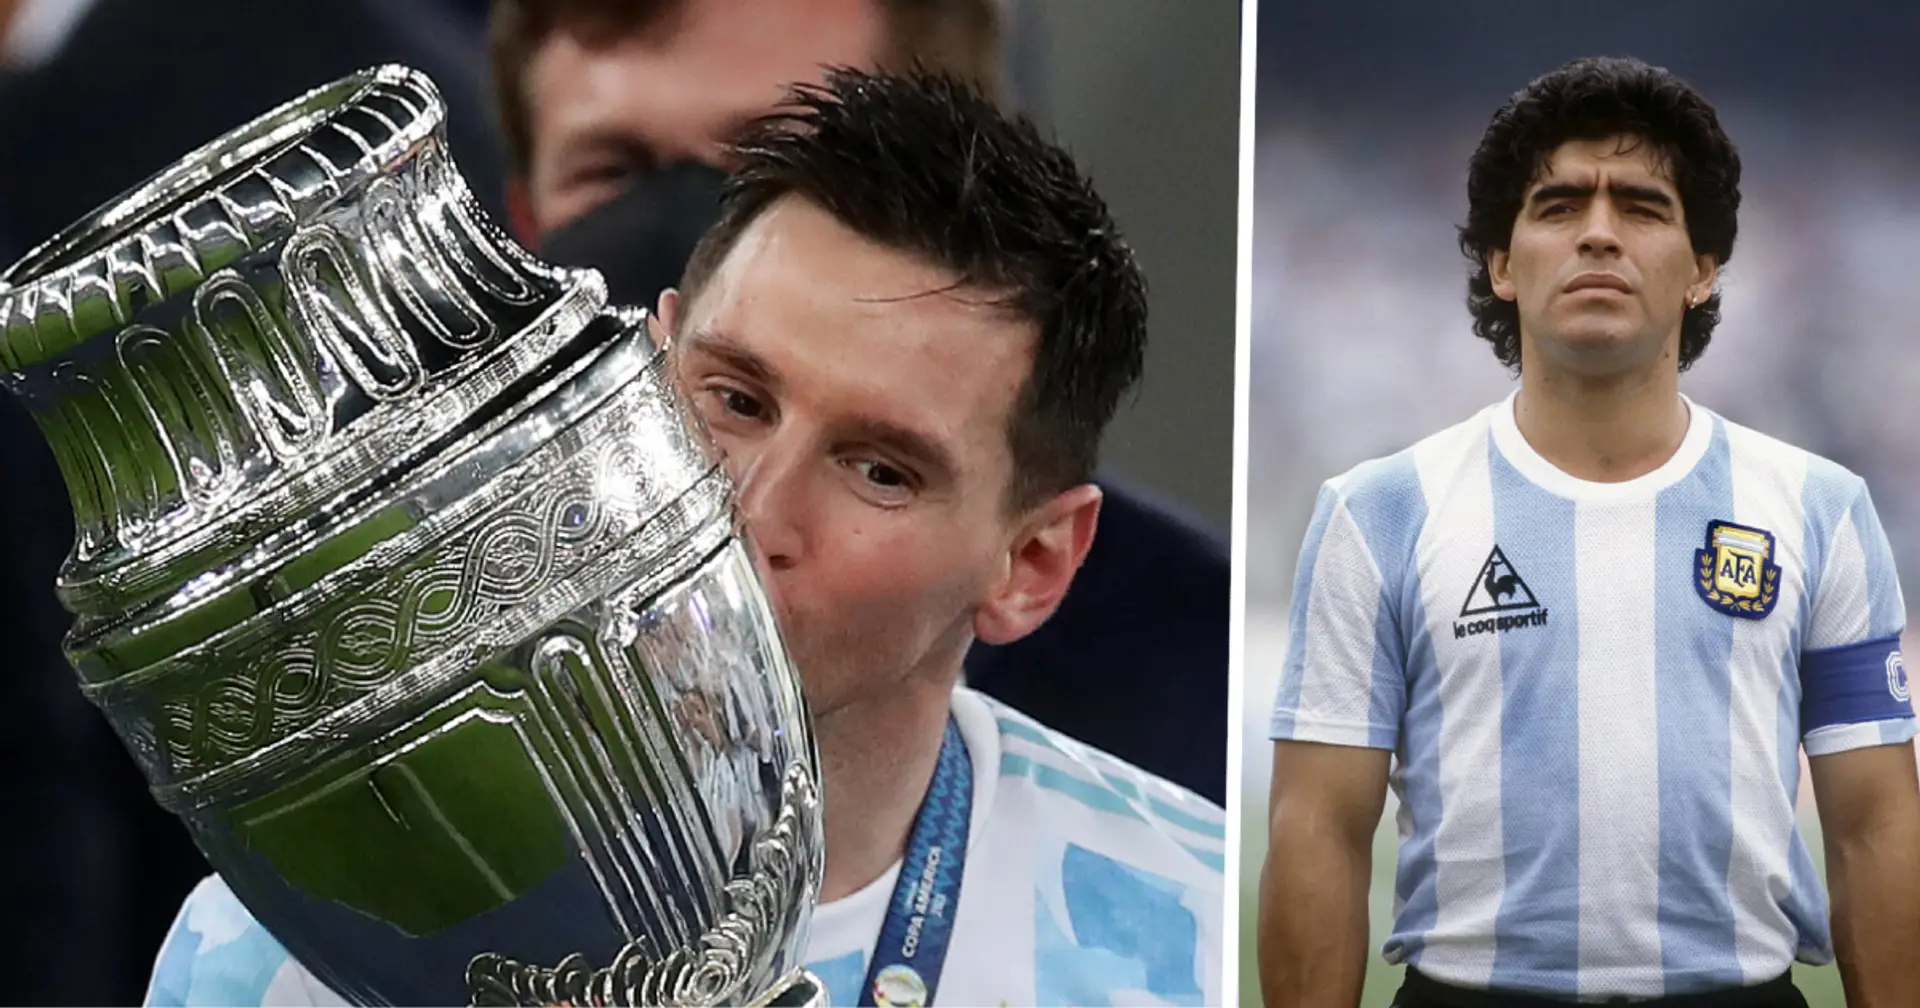 'I'll just remind you of 1986': Fan uses Maradona example against Messi hater